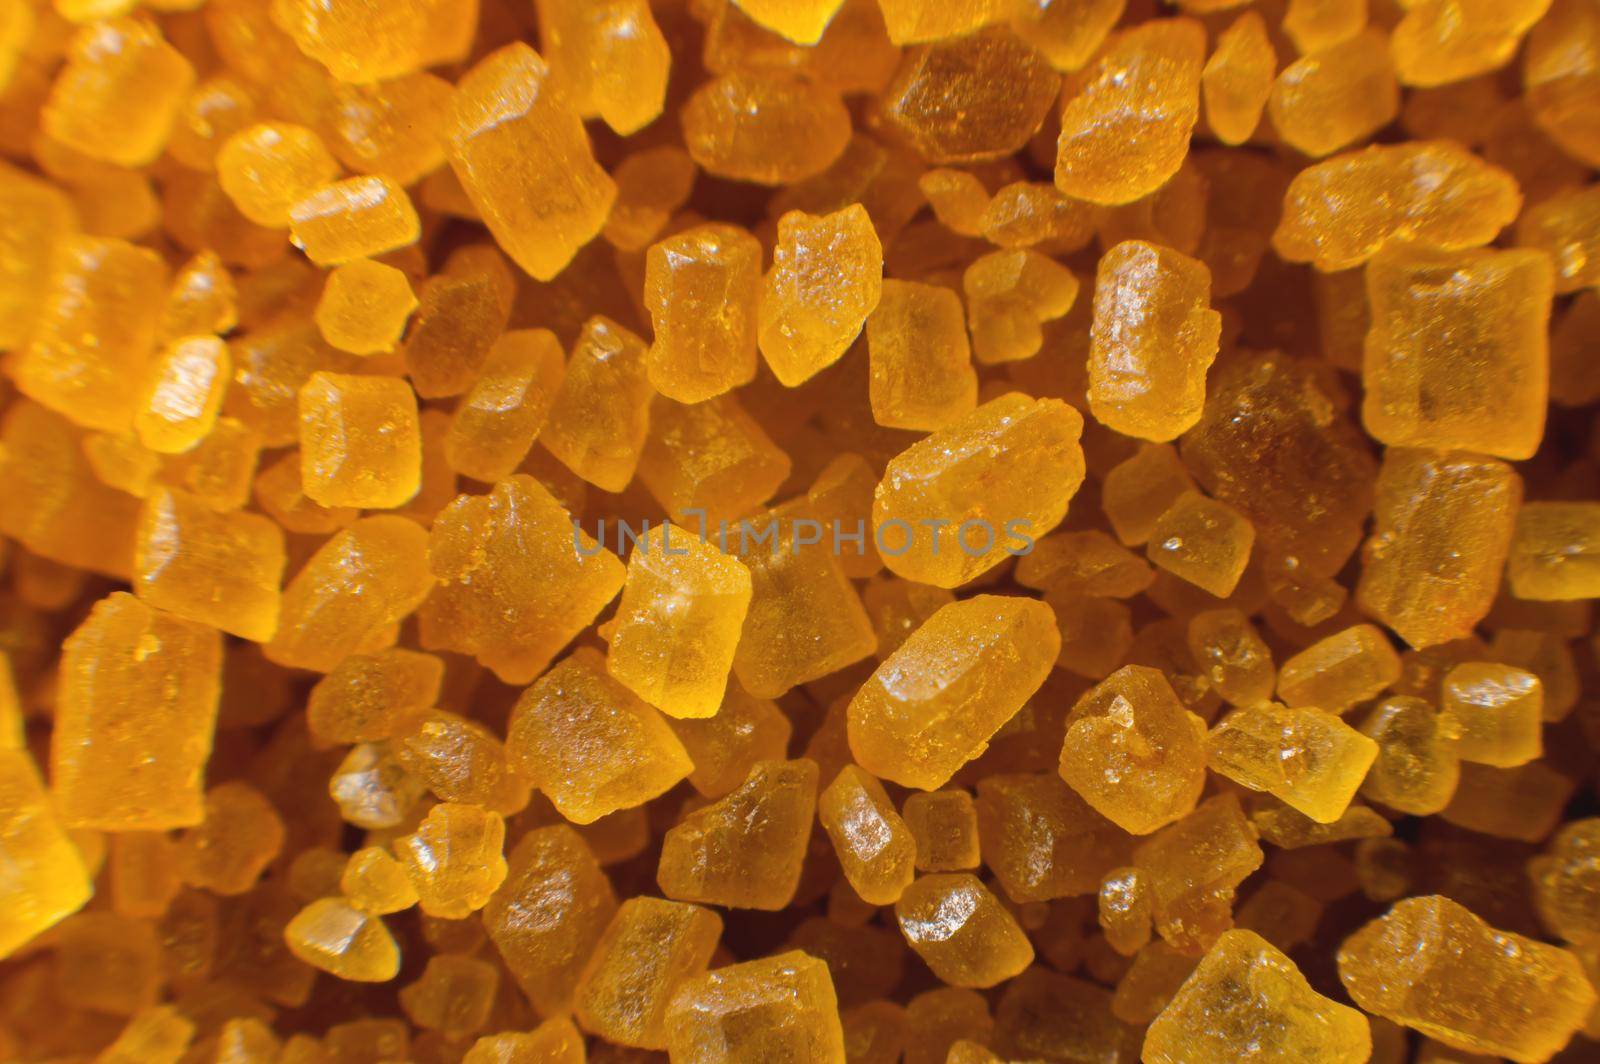 Extreme macro crystals of cane sugar. Abstract sugar background close-up in shallow depth of focus.